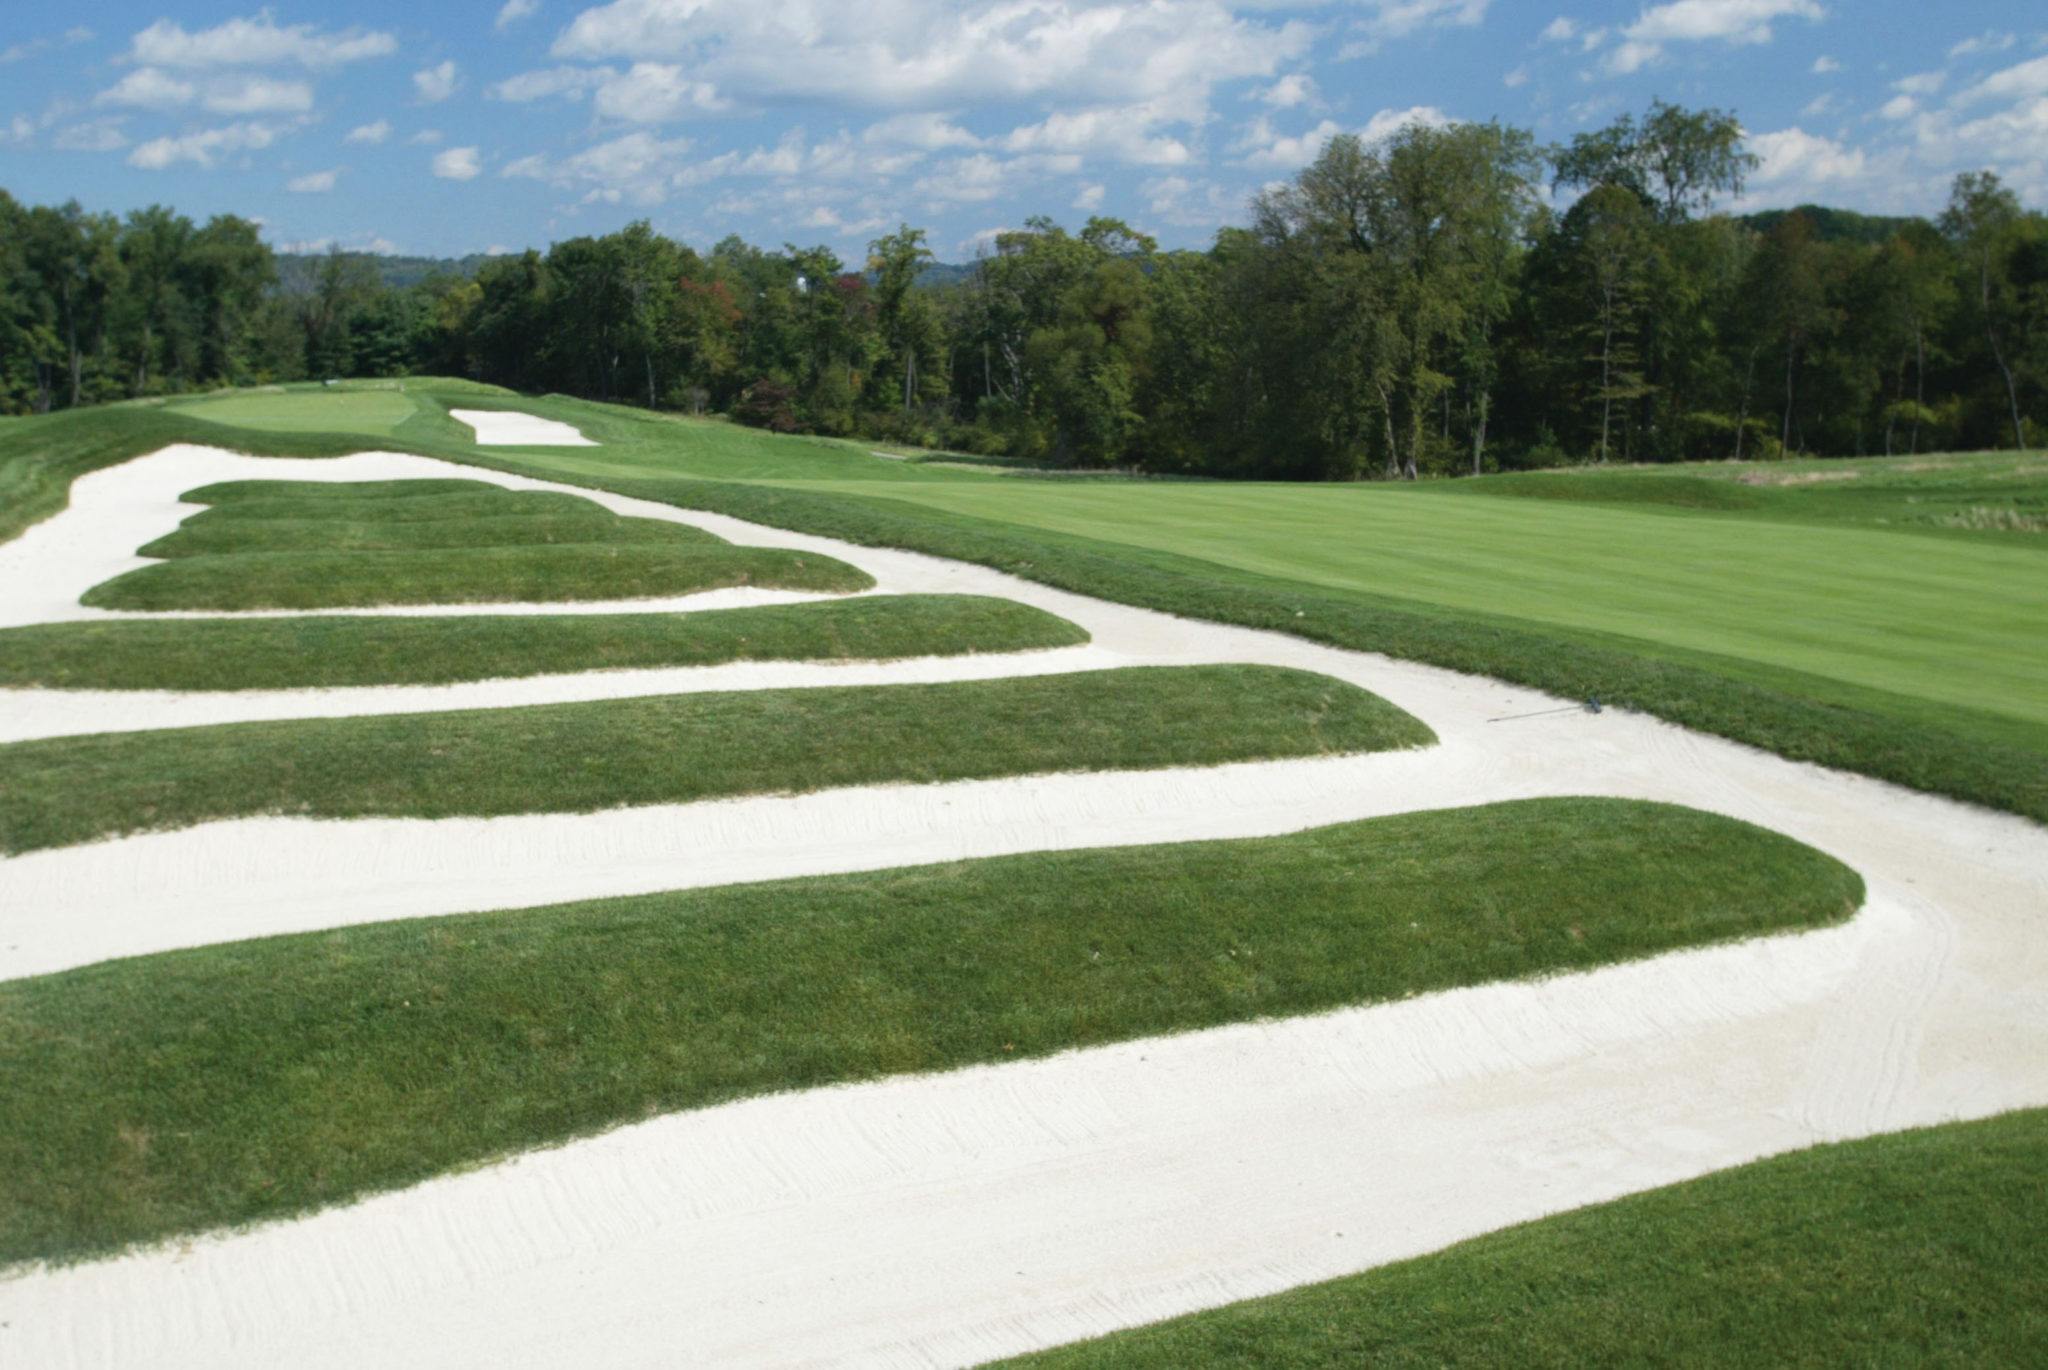 OAKMONT, PA- SEPTEMBER 26:  General view of the church pew bunkering on the 15th hole at Oakmont Country Club, site of the 2007 US Open on September 26, 2006 in Oakmont, Pensylvania. (Photo by Rick Stewart/Getty Images)